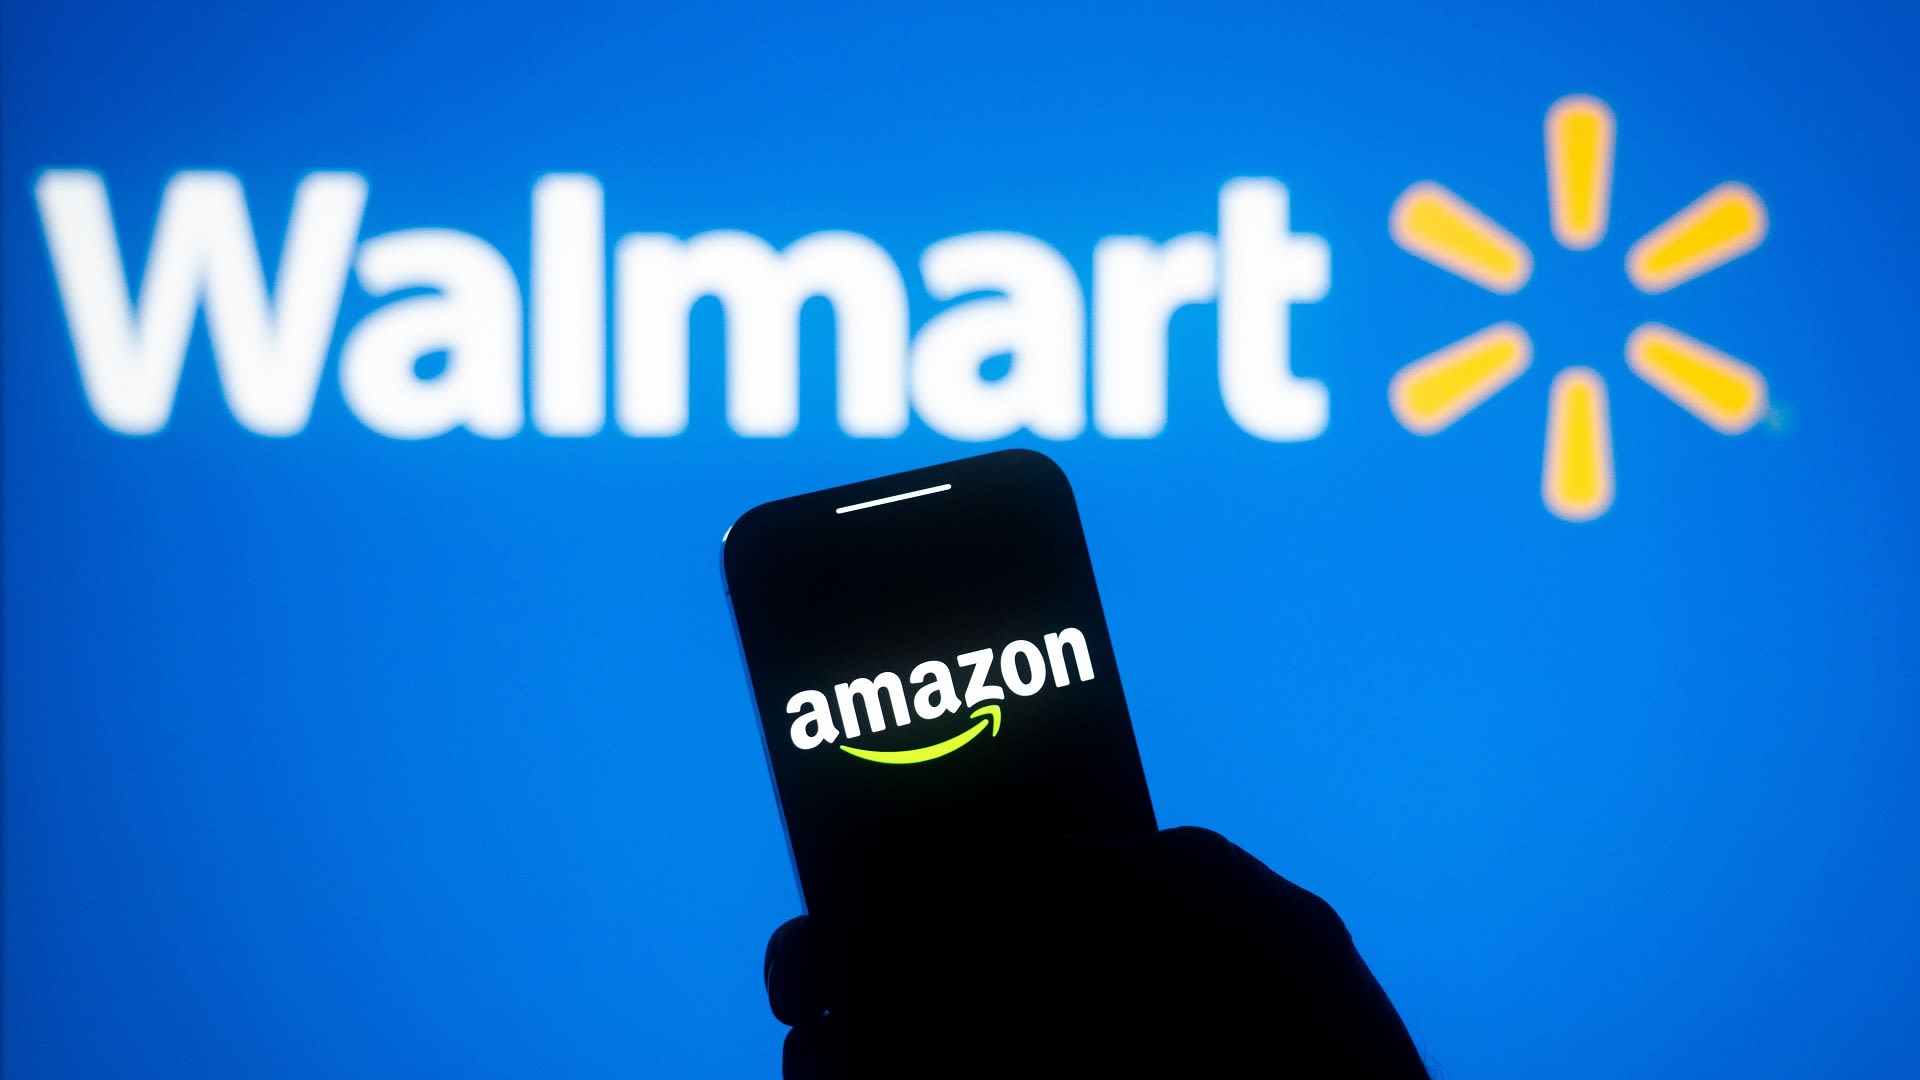 6 Items That Are Cheaper on Amazon Than at Walmart